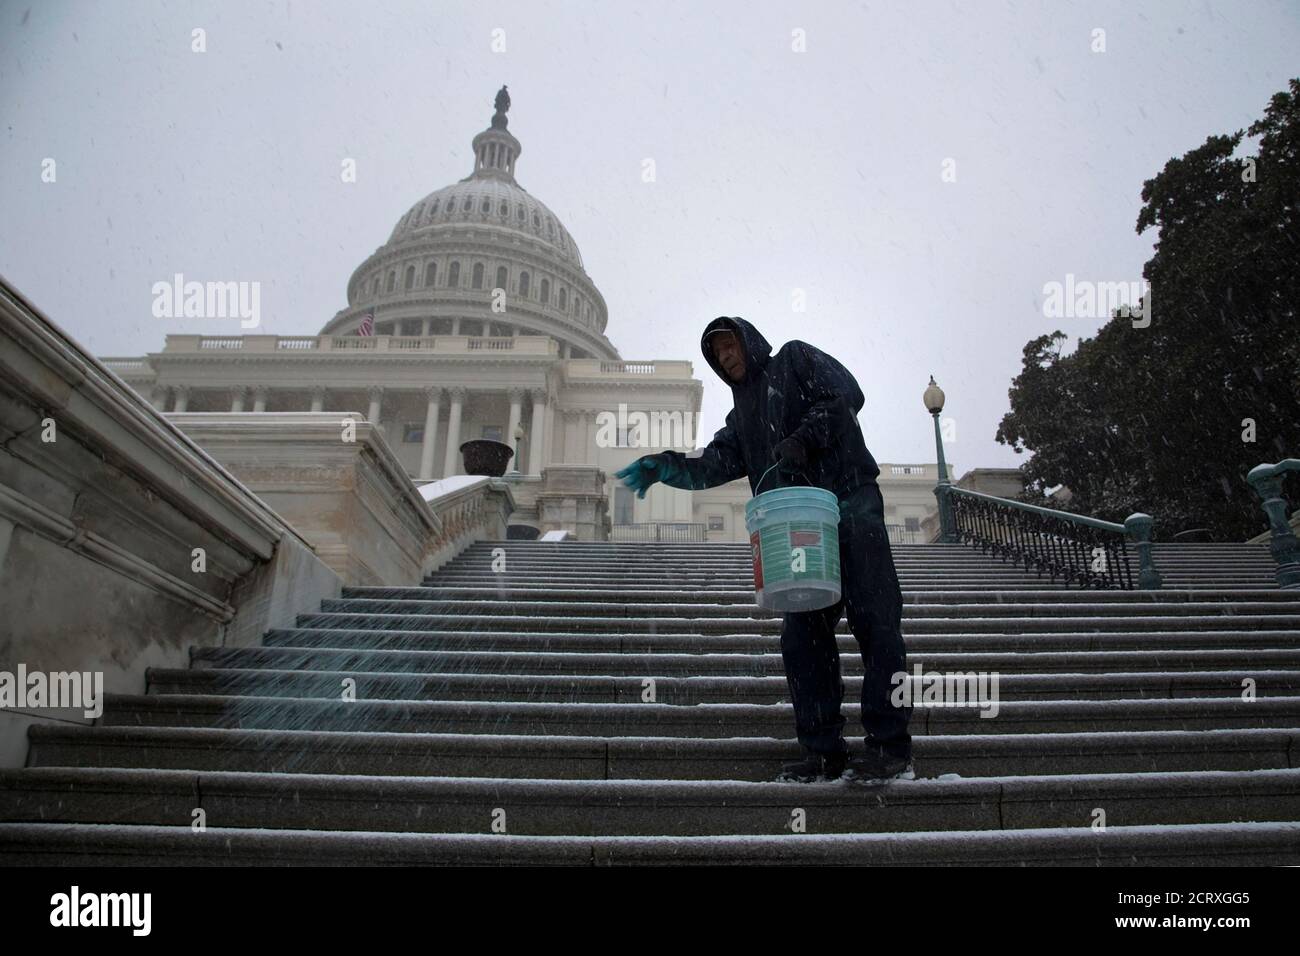 A worker spreads an anti-ice mix on the steps of the U.S. Capitol as light snow flurries fall in Washington December 8, 2013. REUTERS/Jonathan Ernst (UNITED STATES - Tags: POLITICS ENVIRONMENT SOCIETY) Stock Photo